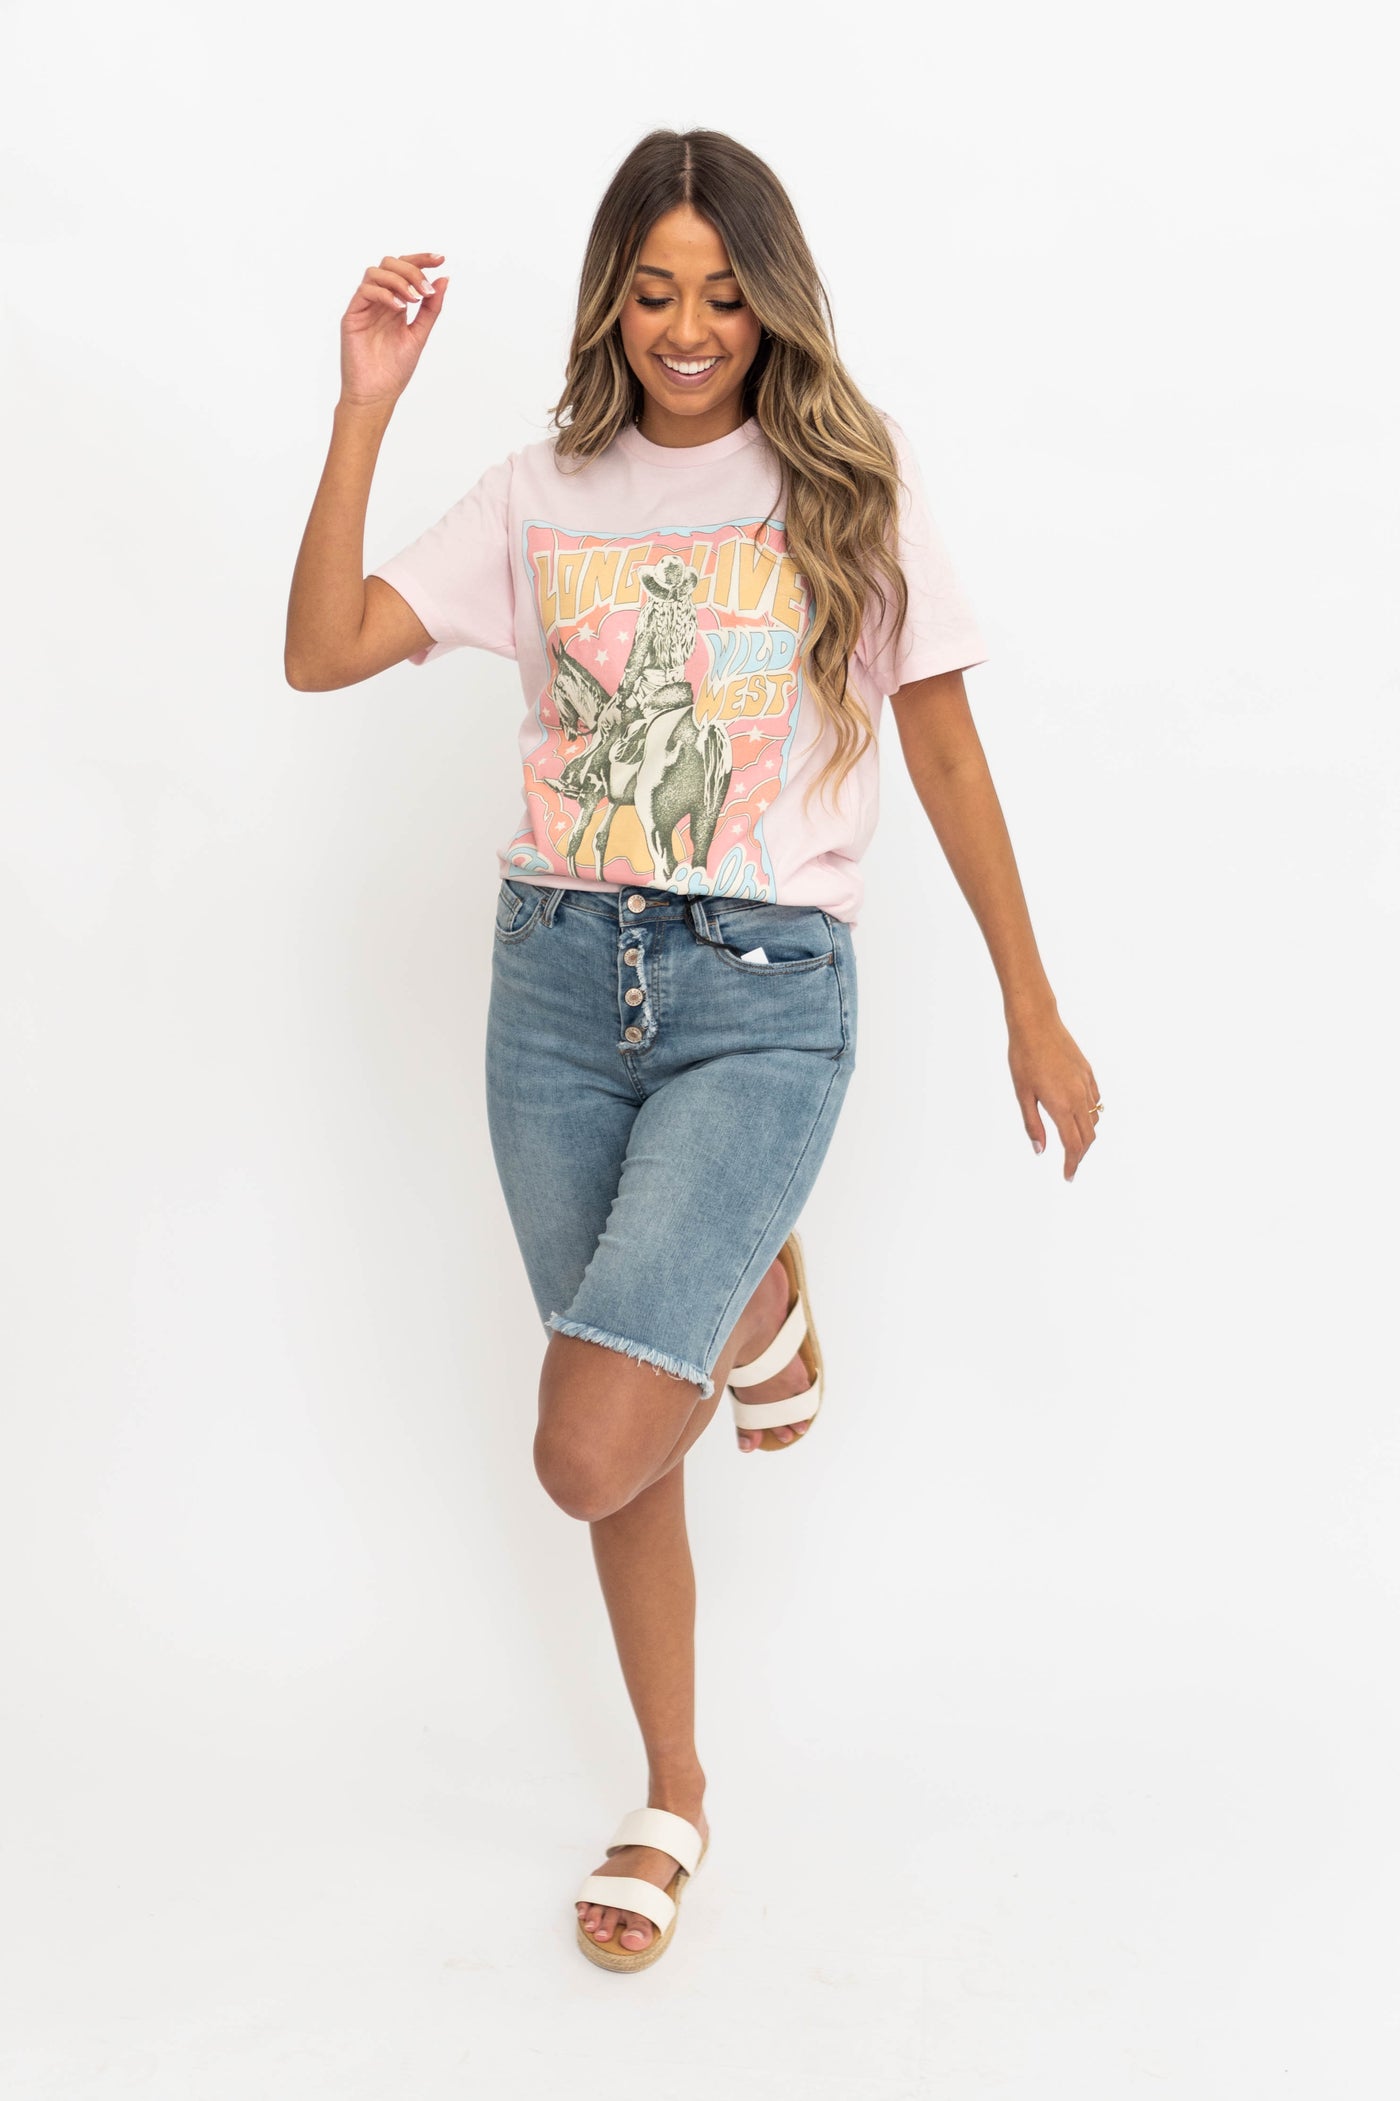 Short sleeve pink graphic tee